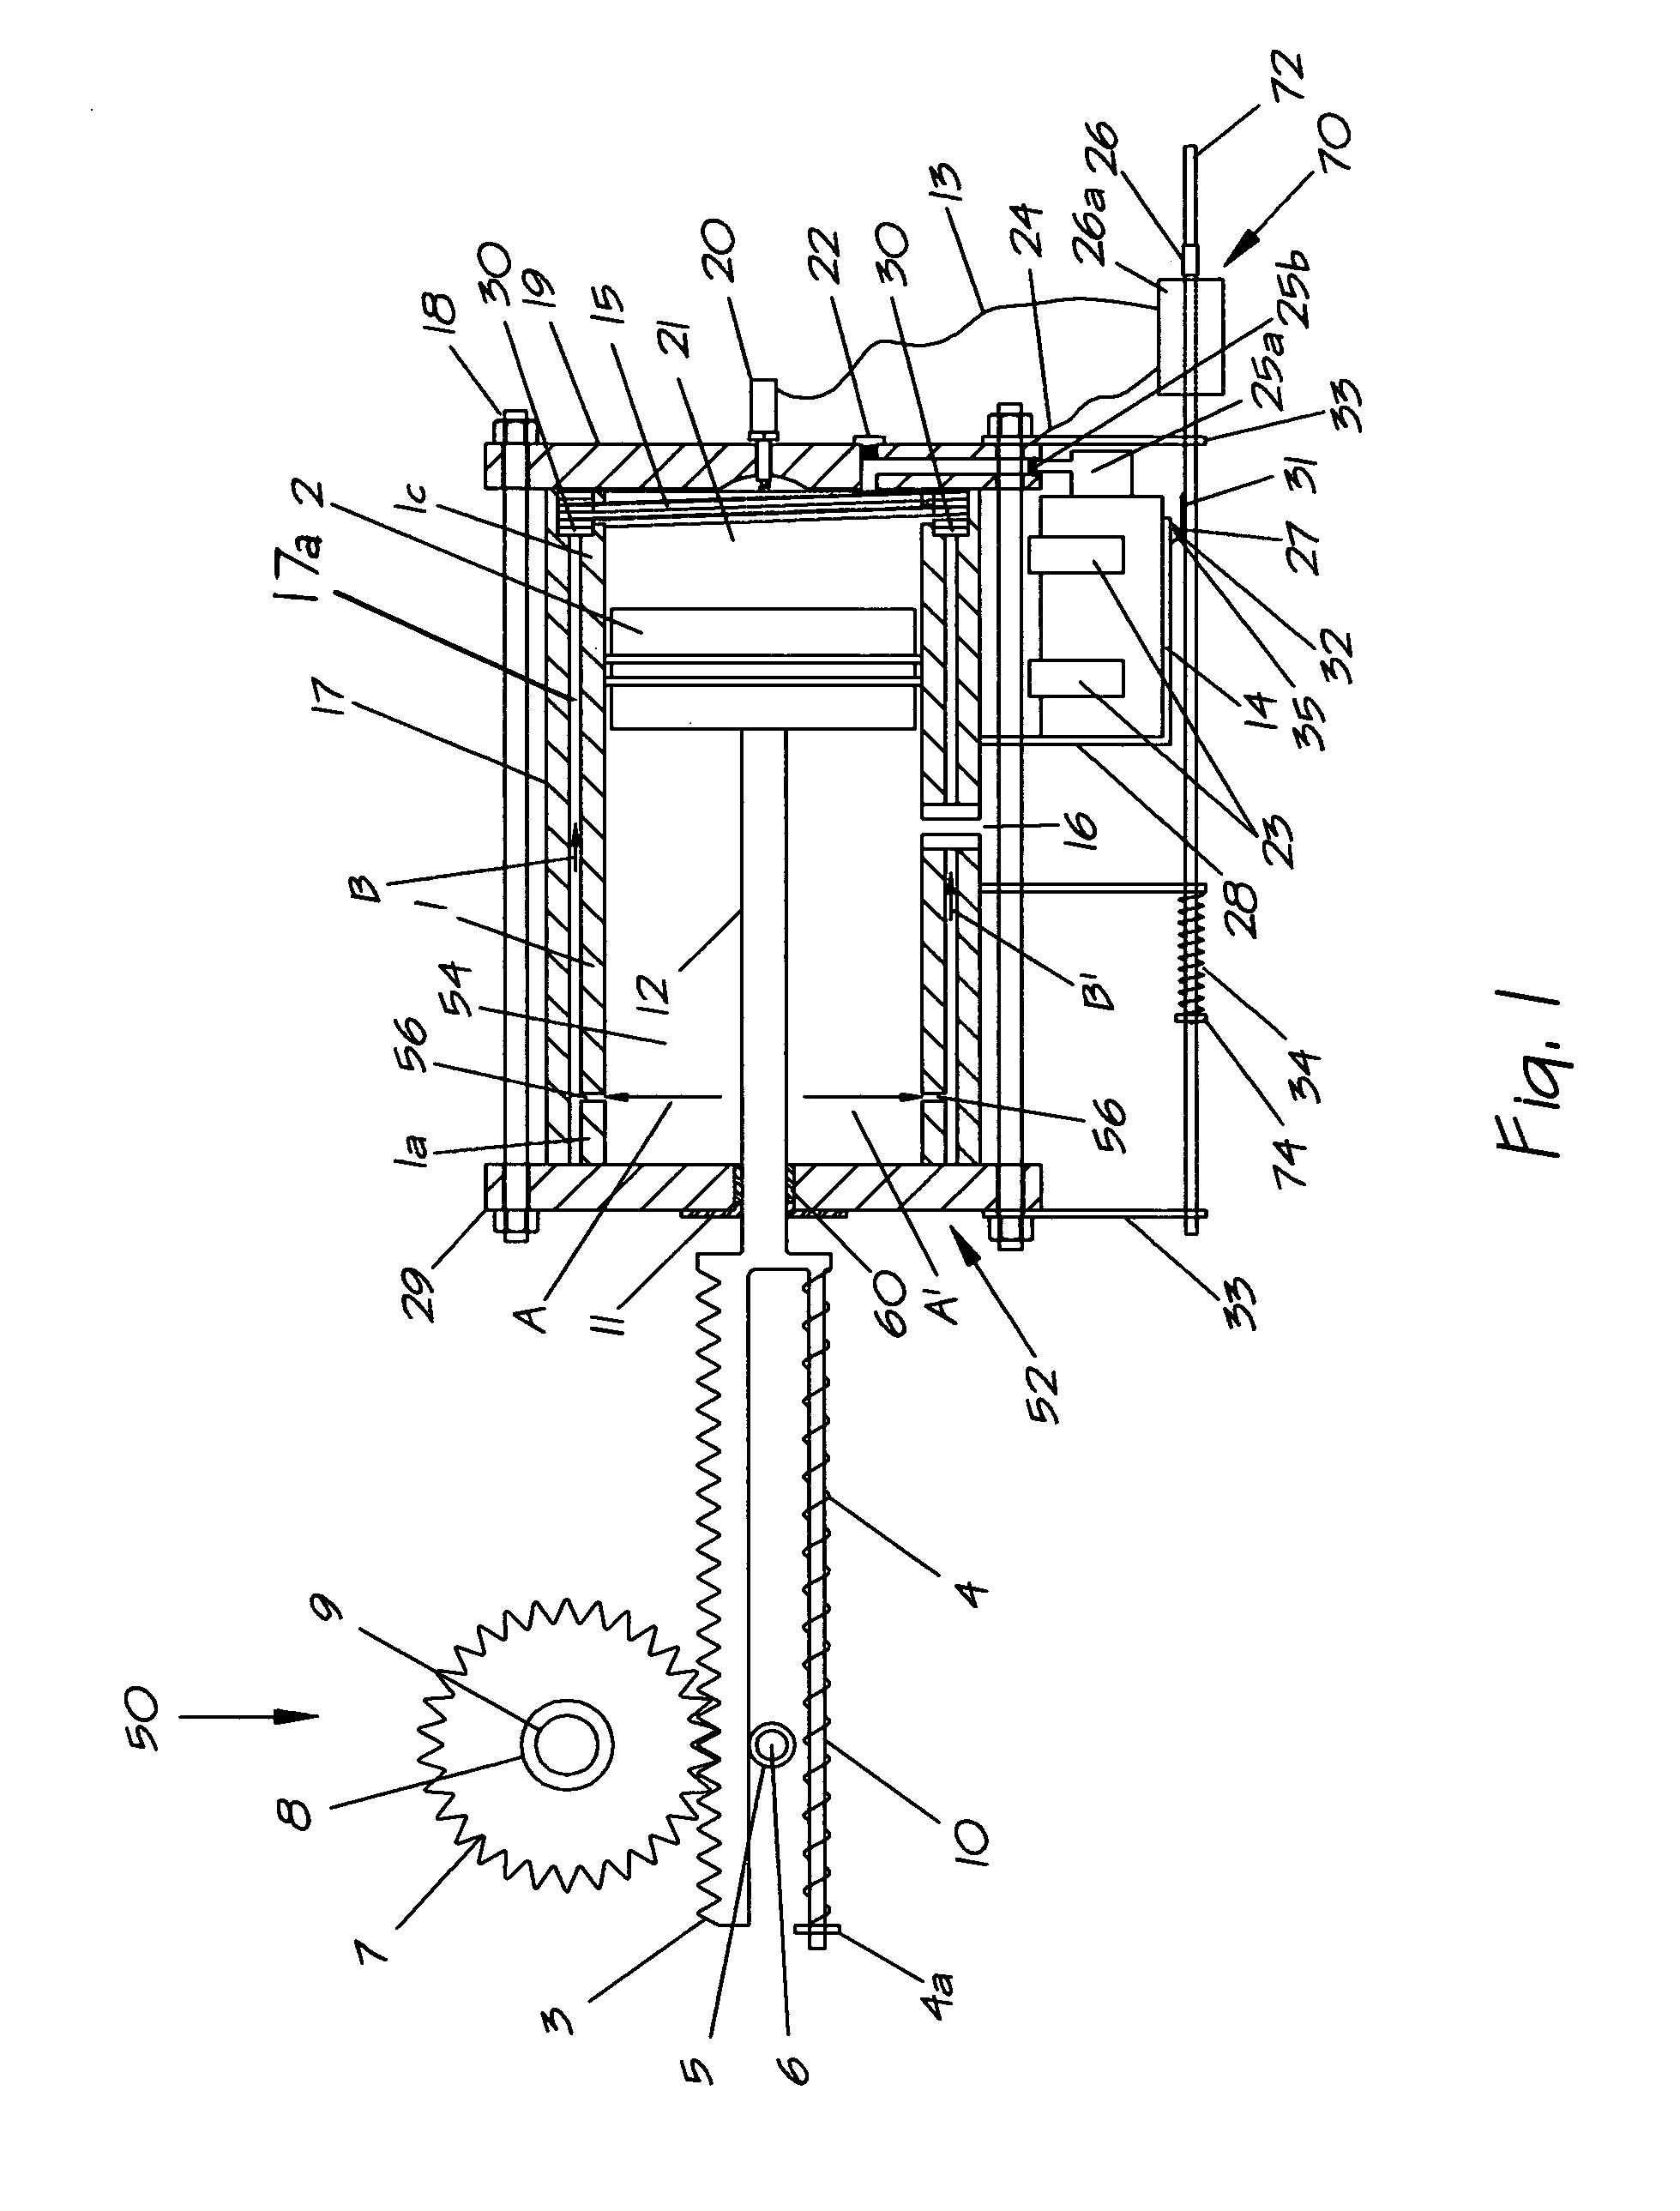 Internal combustion device and methods of use